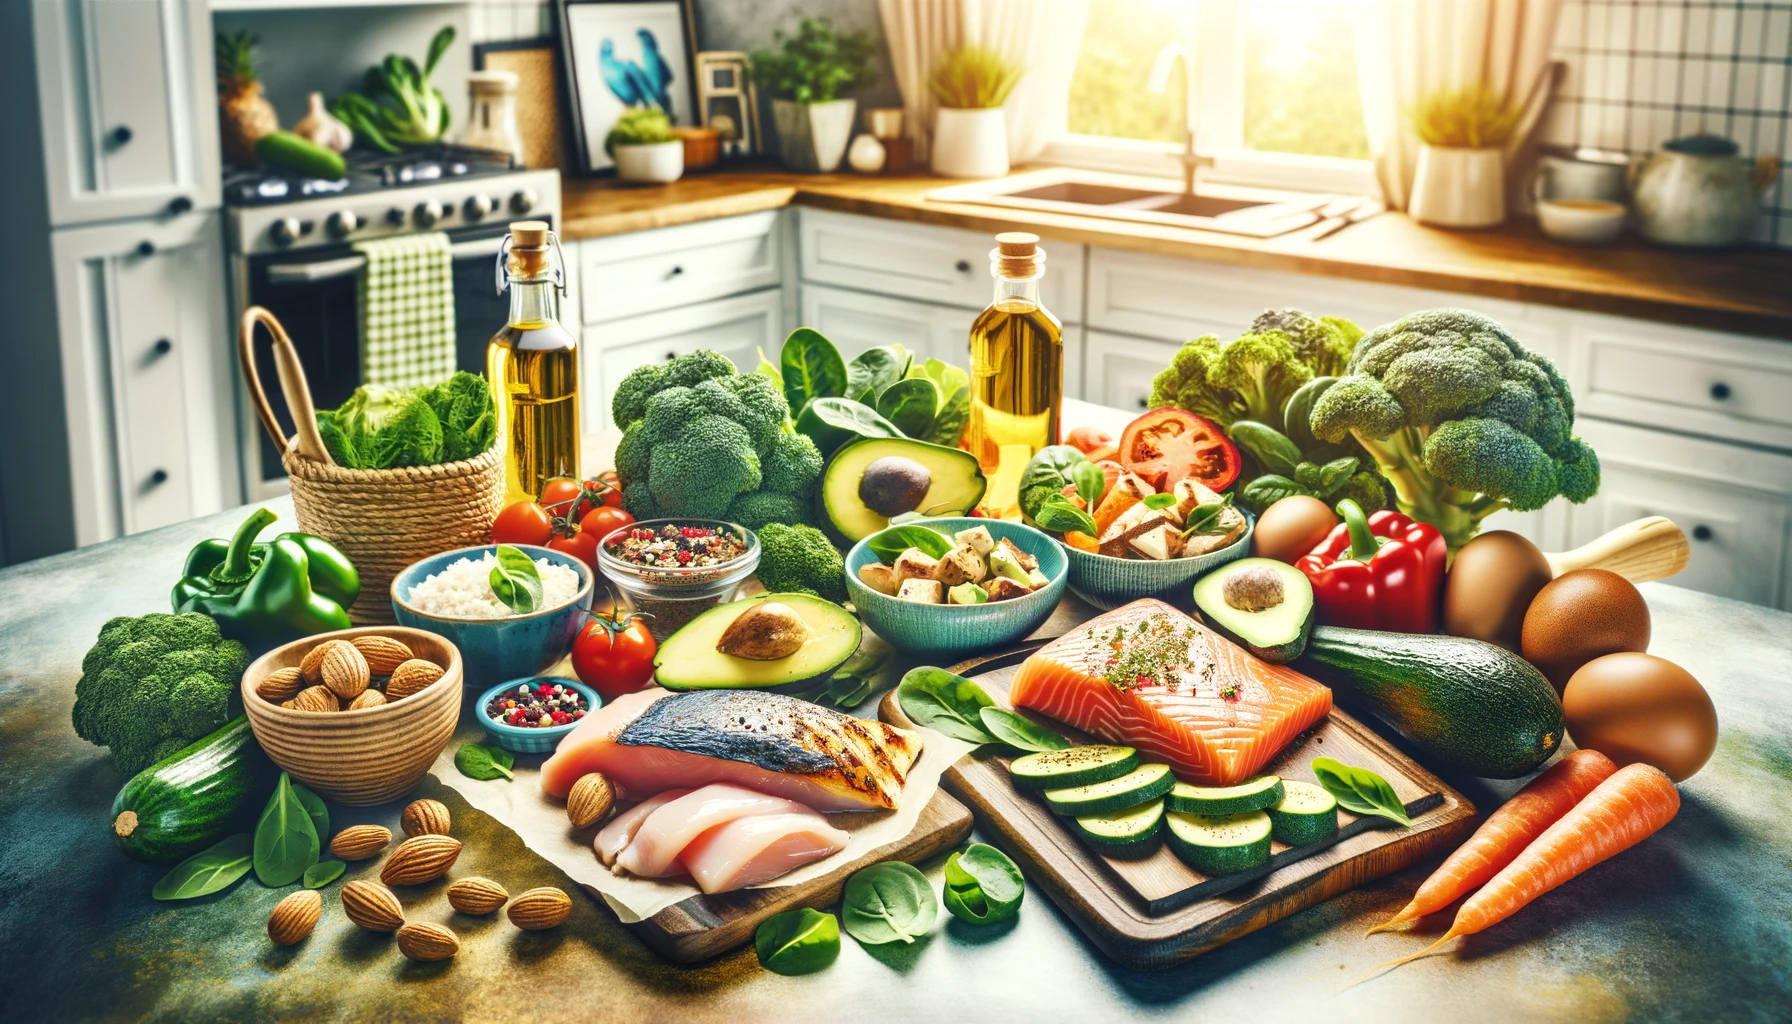 A vibrant and inviting image showcasing a variety of keto-friendly foods and ingredients, tailored for women over 50.